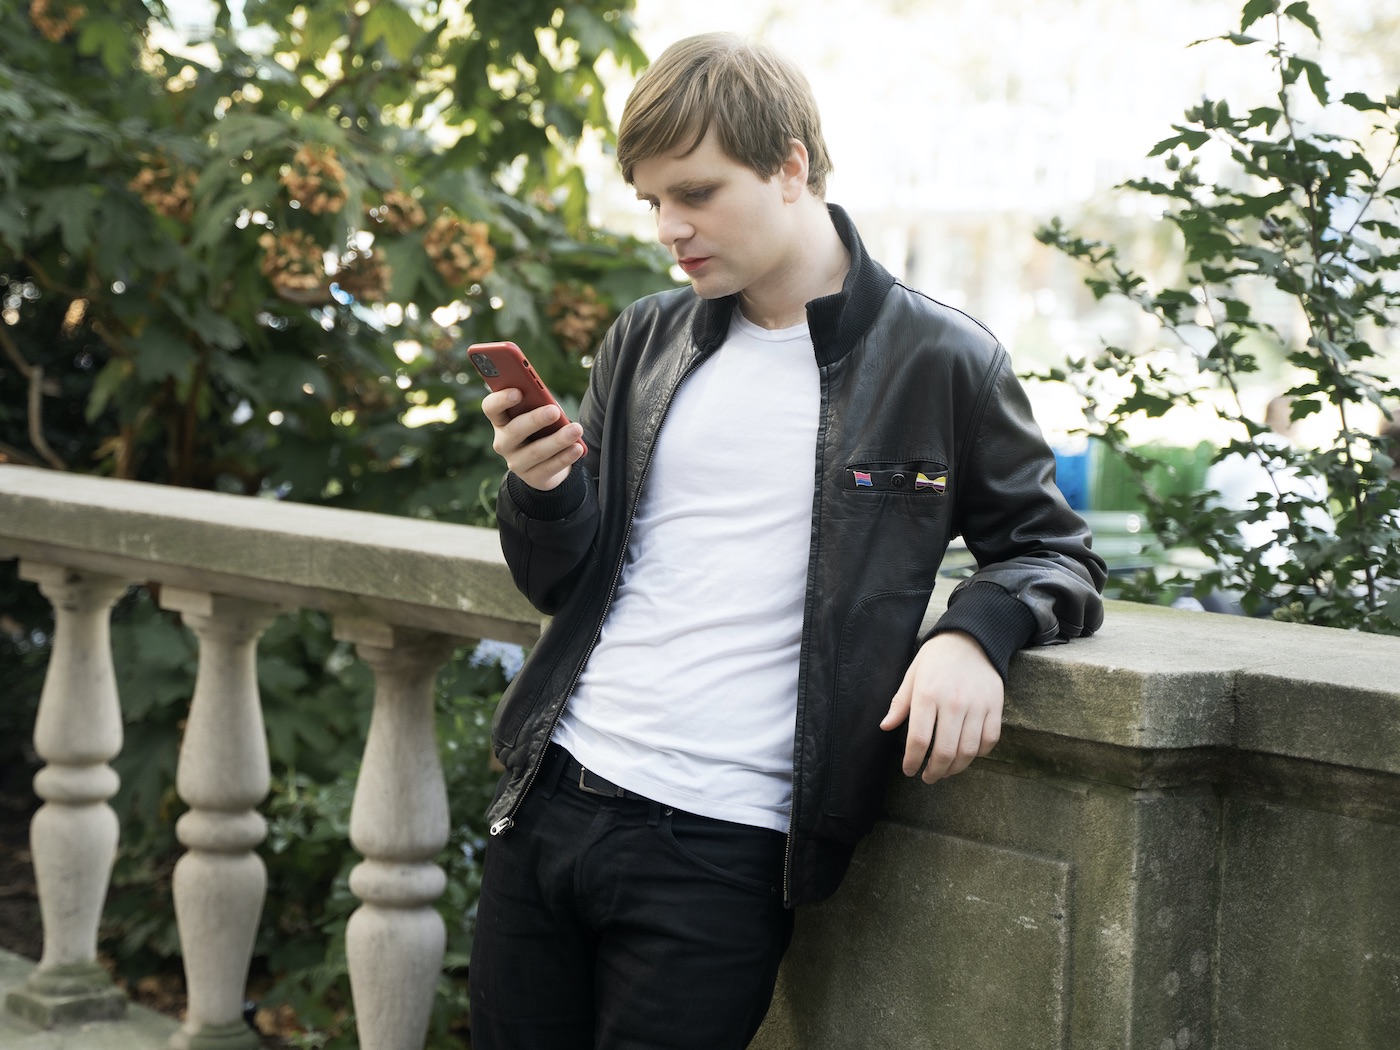 Photo of Matthew Bischoff looking at their phone waring a leather jacket in a park.